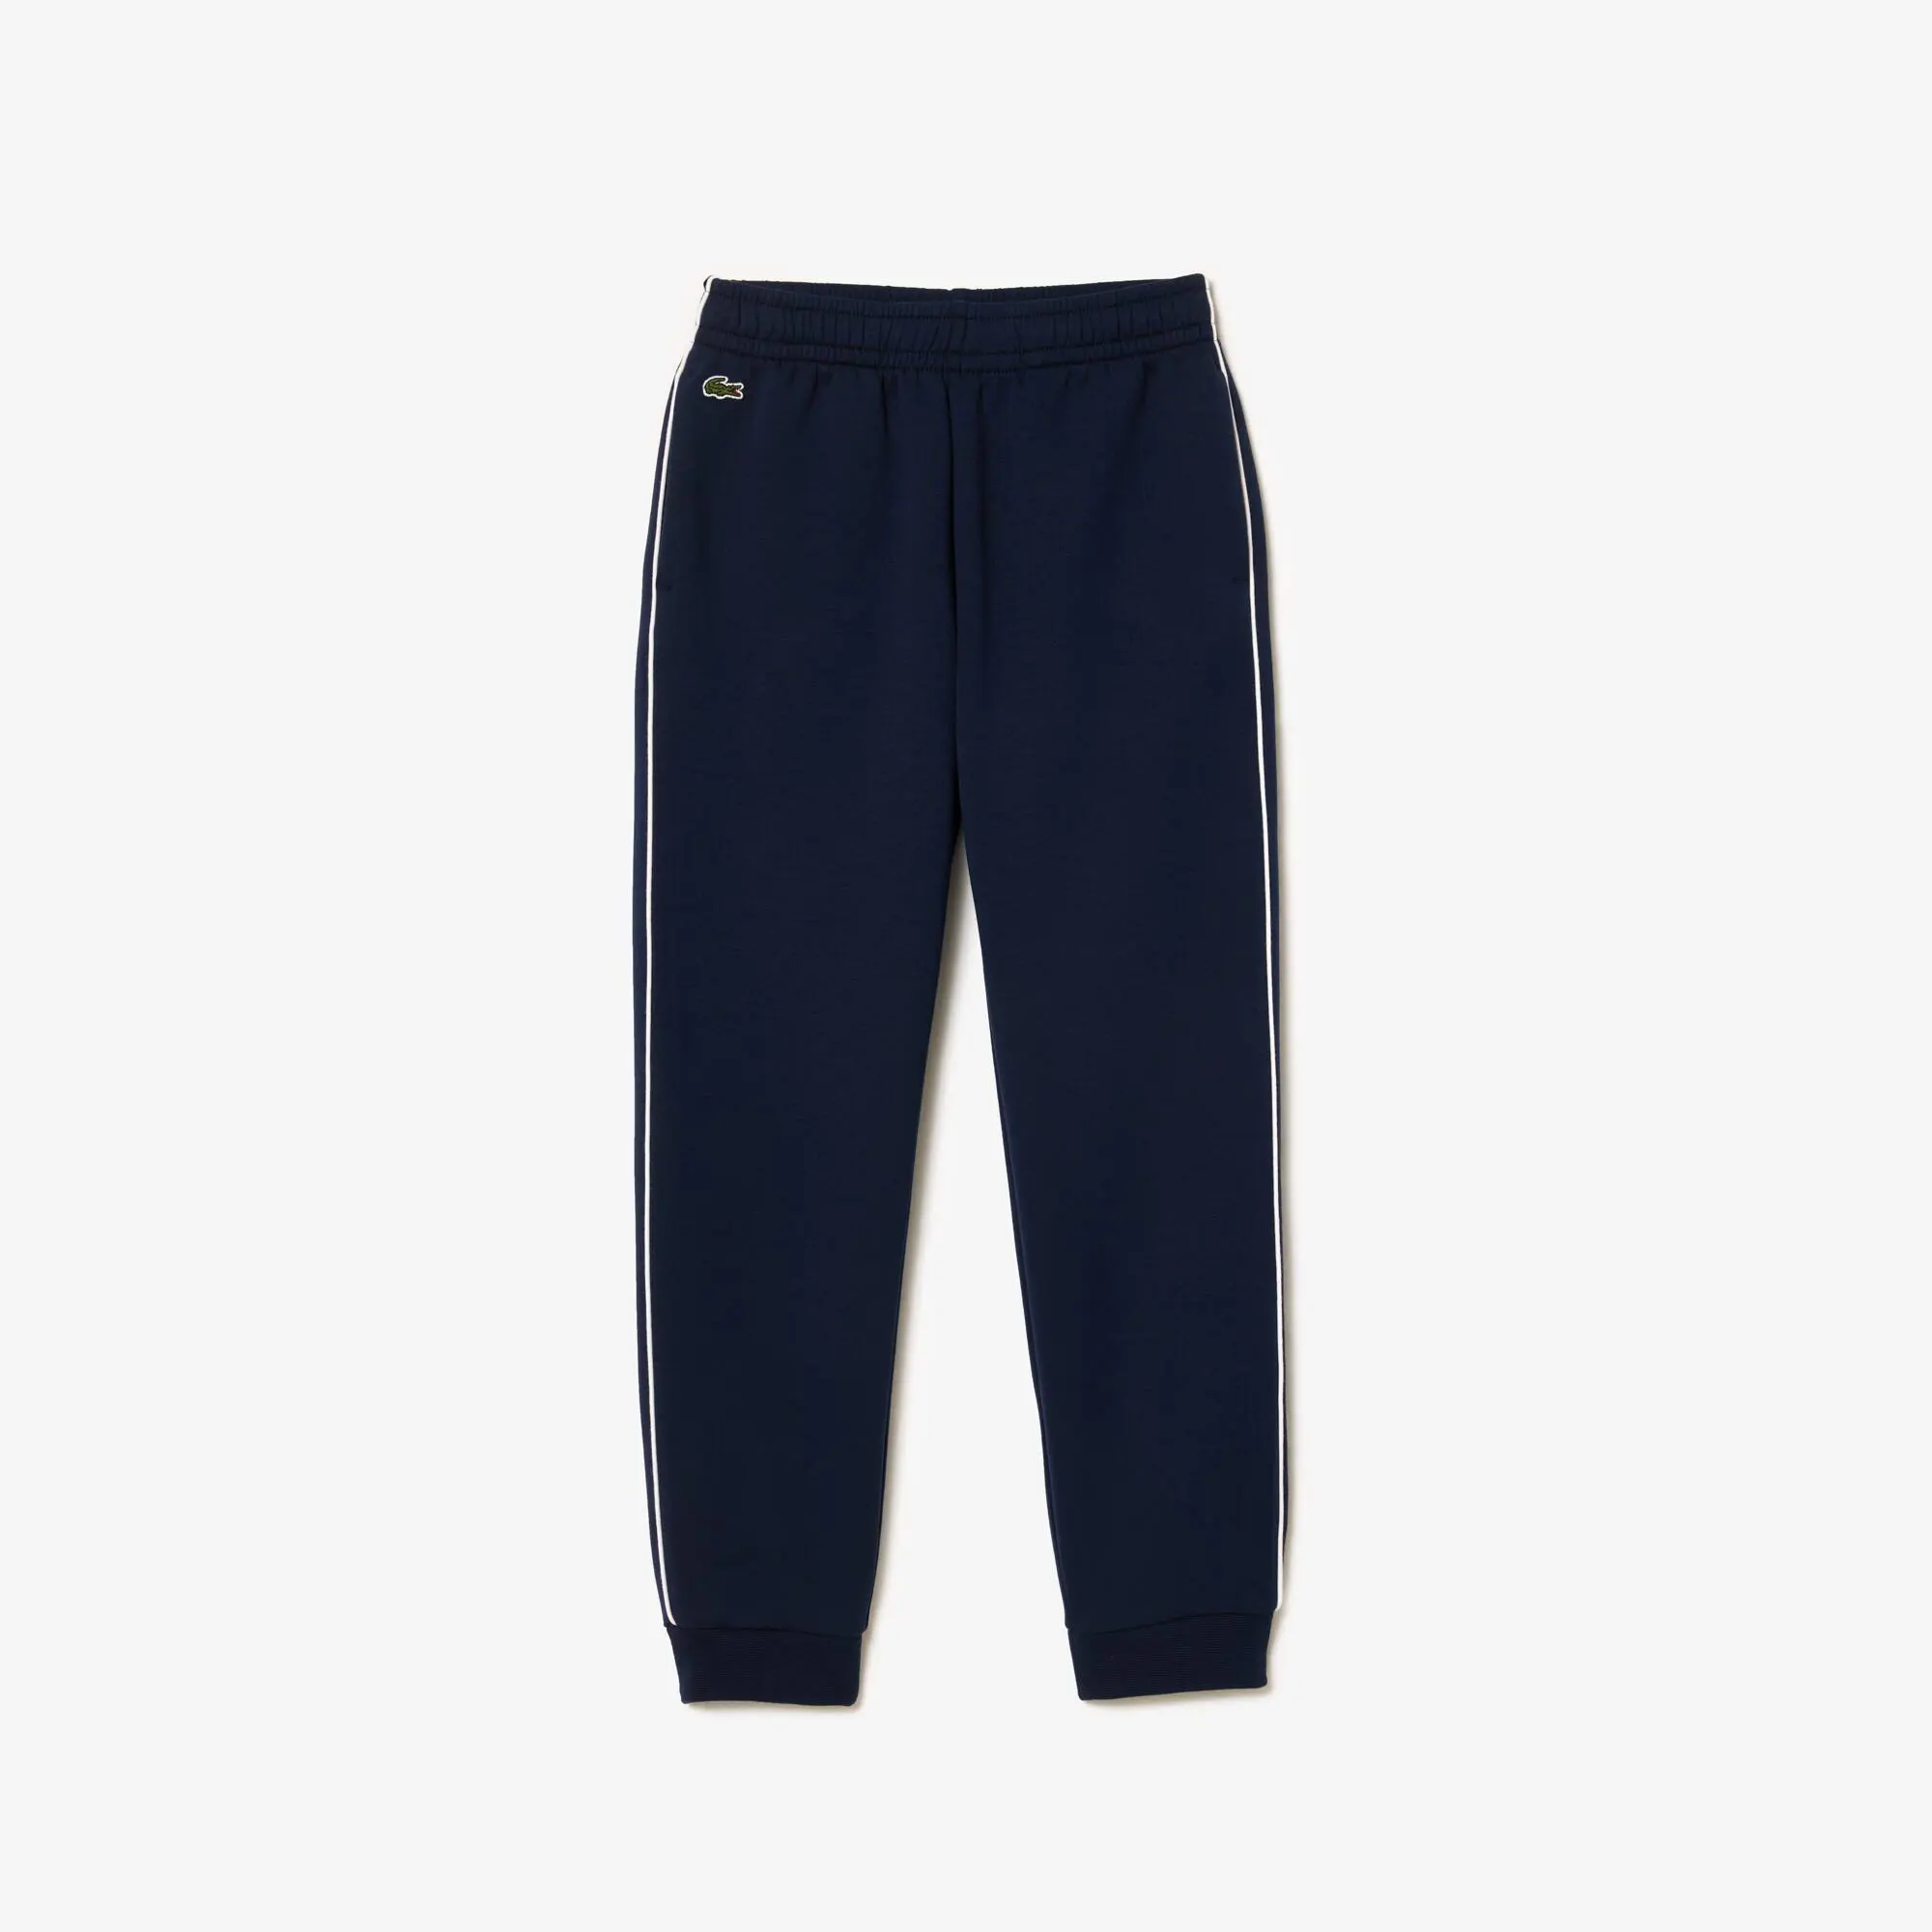 Lacoste Contrast Accent Track Pants. 1